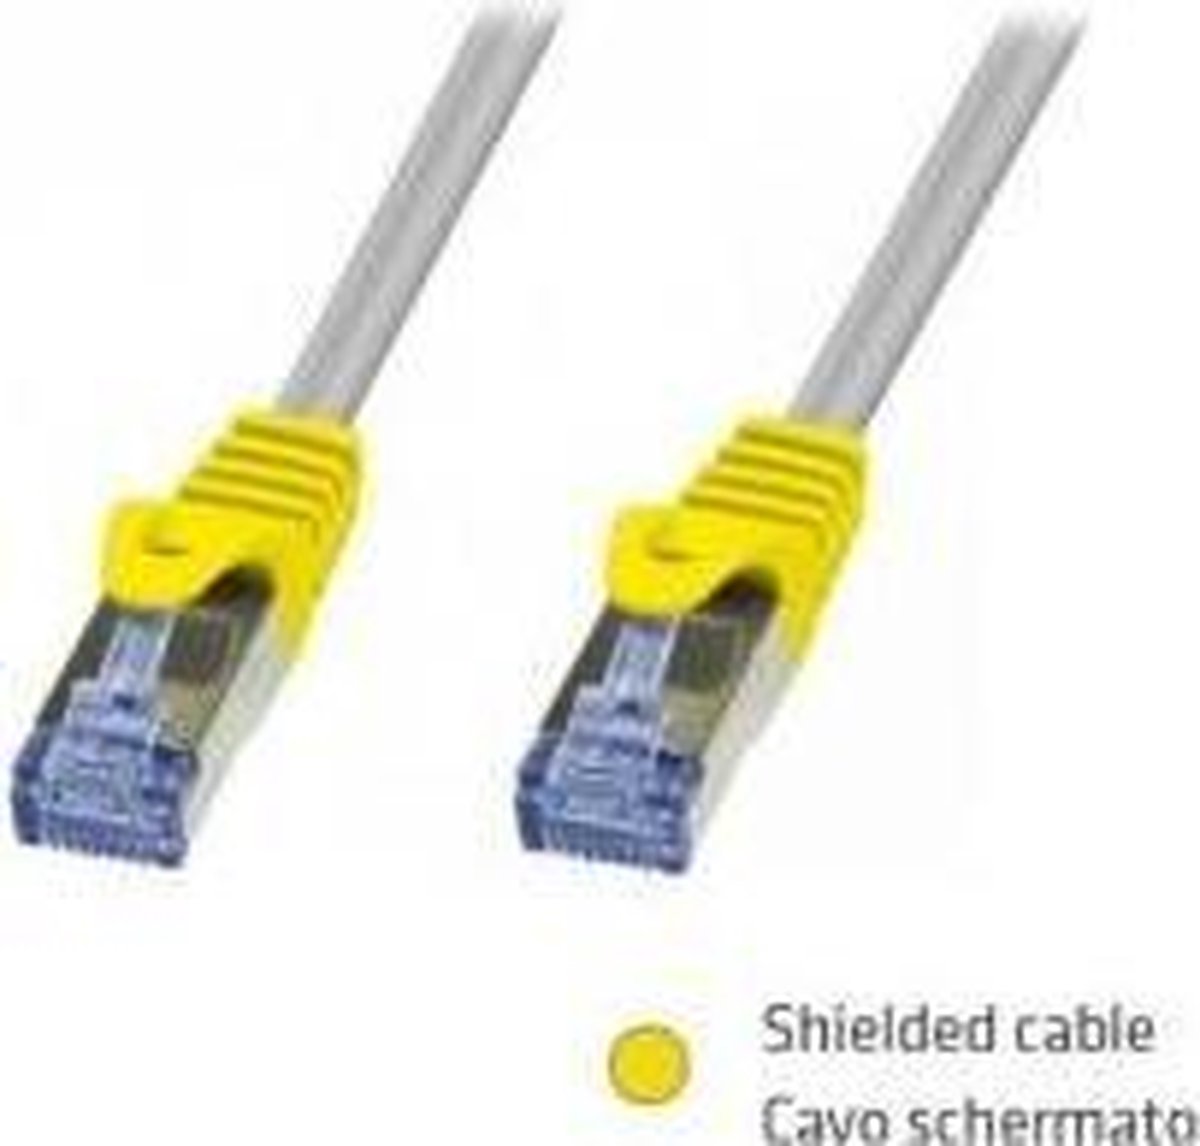 ADJ 310-00053 Networking cable, FTP, Cat5e, Screened, 0.5M, Grey, BLISTER